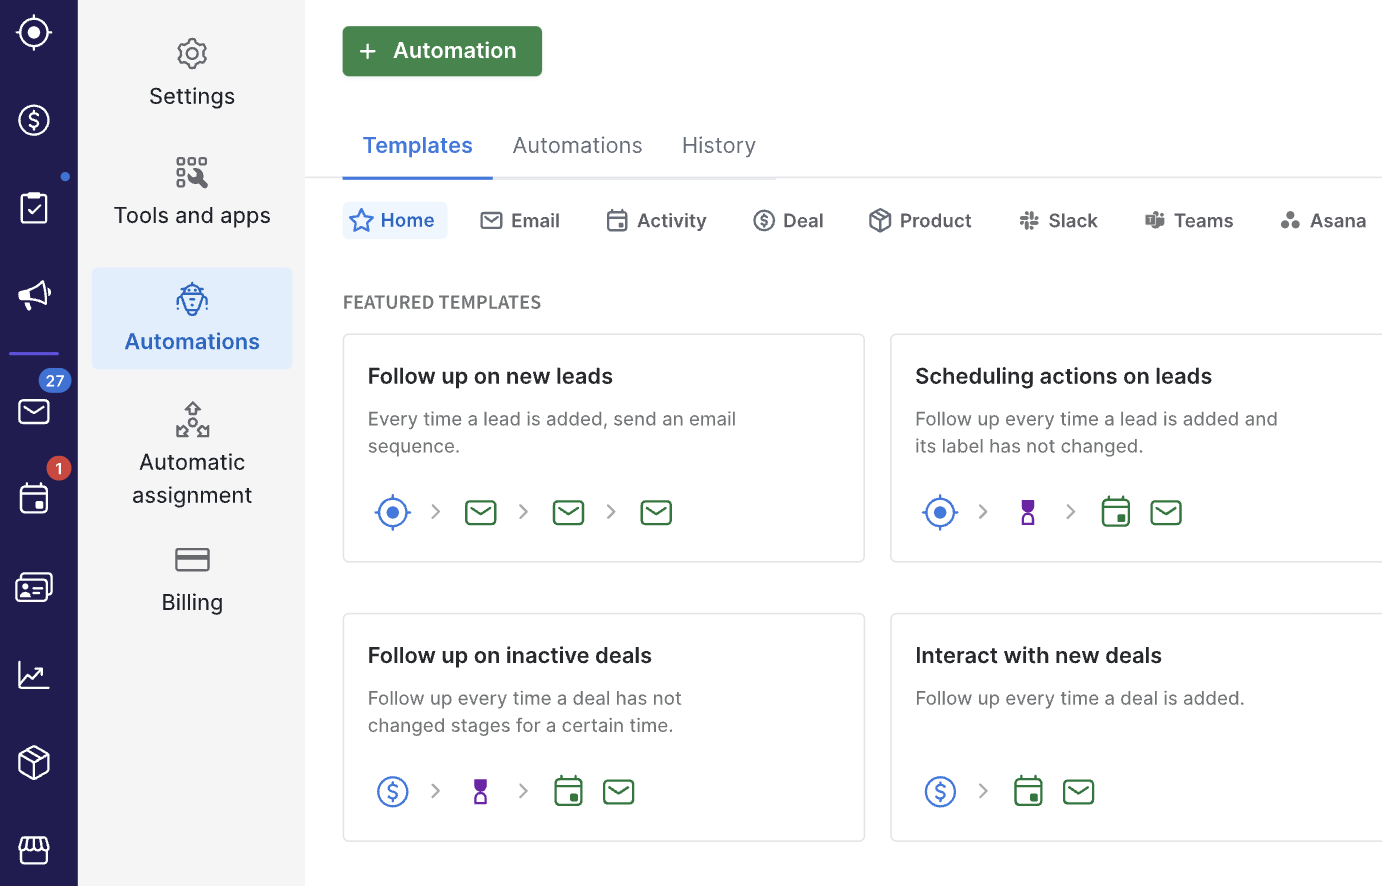 Pipedrive’s automation dashboard with templates for deal management.